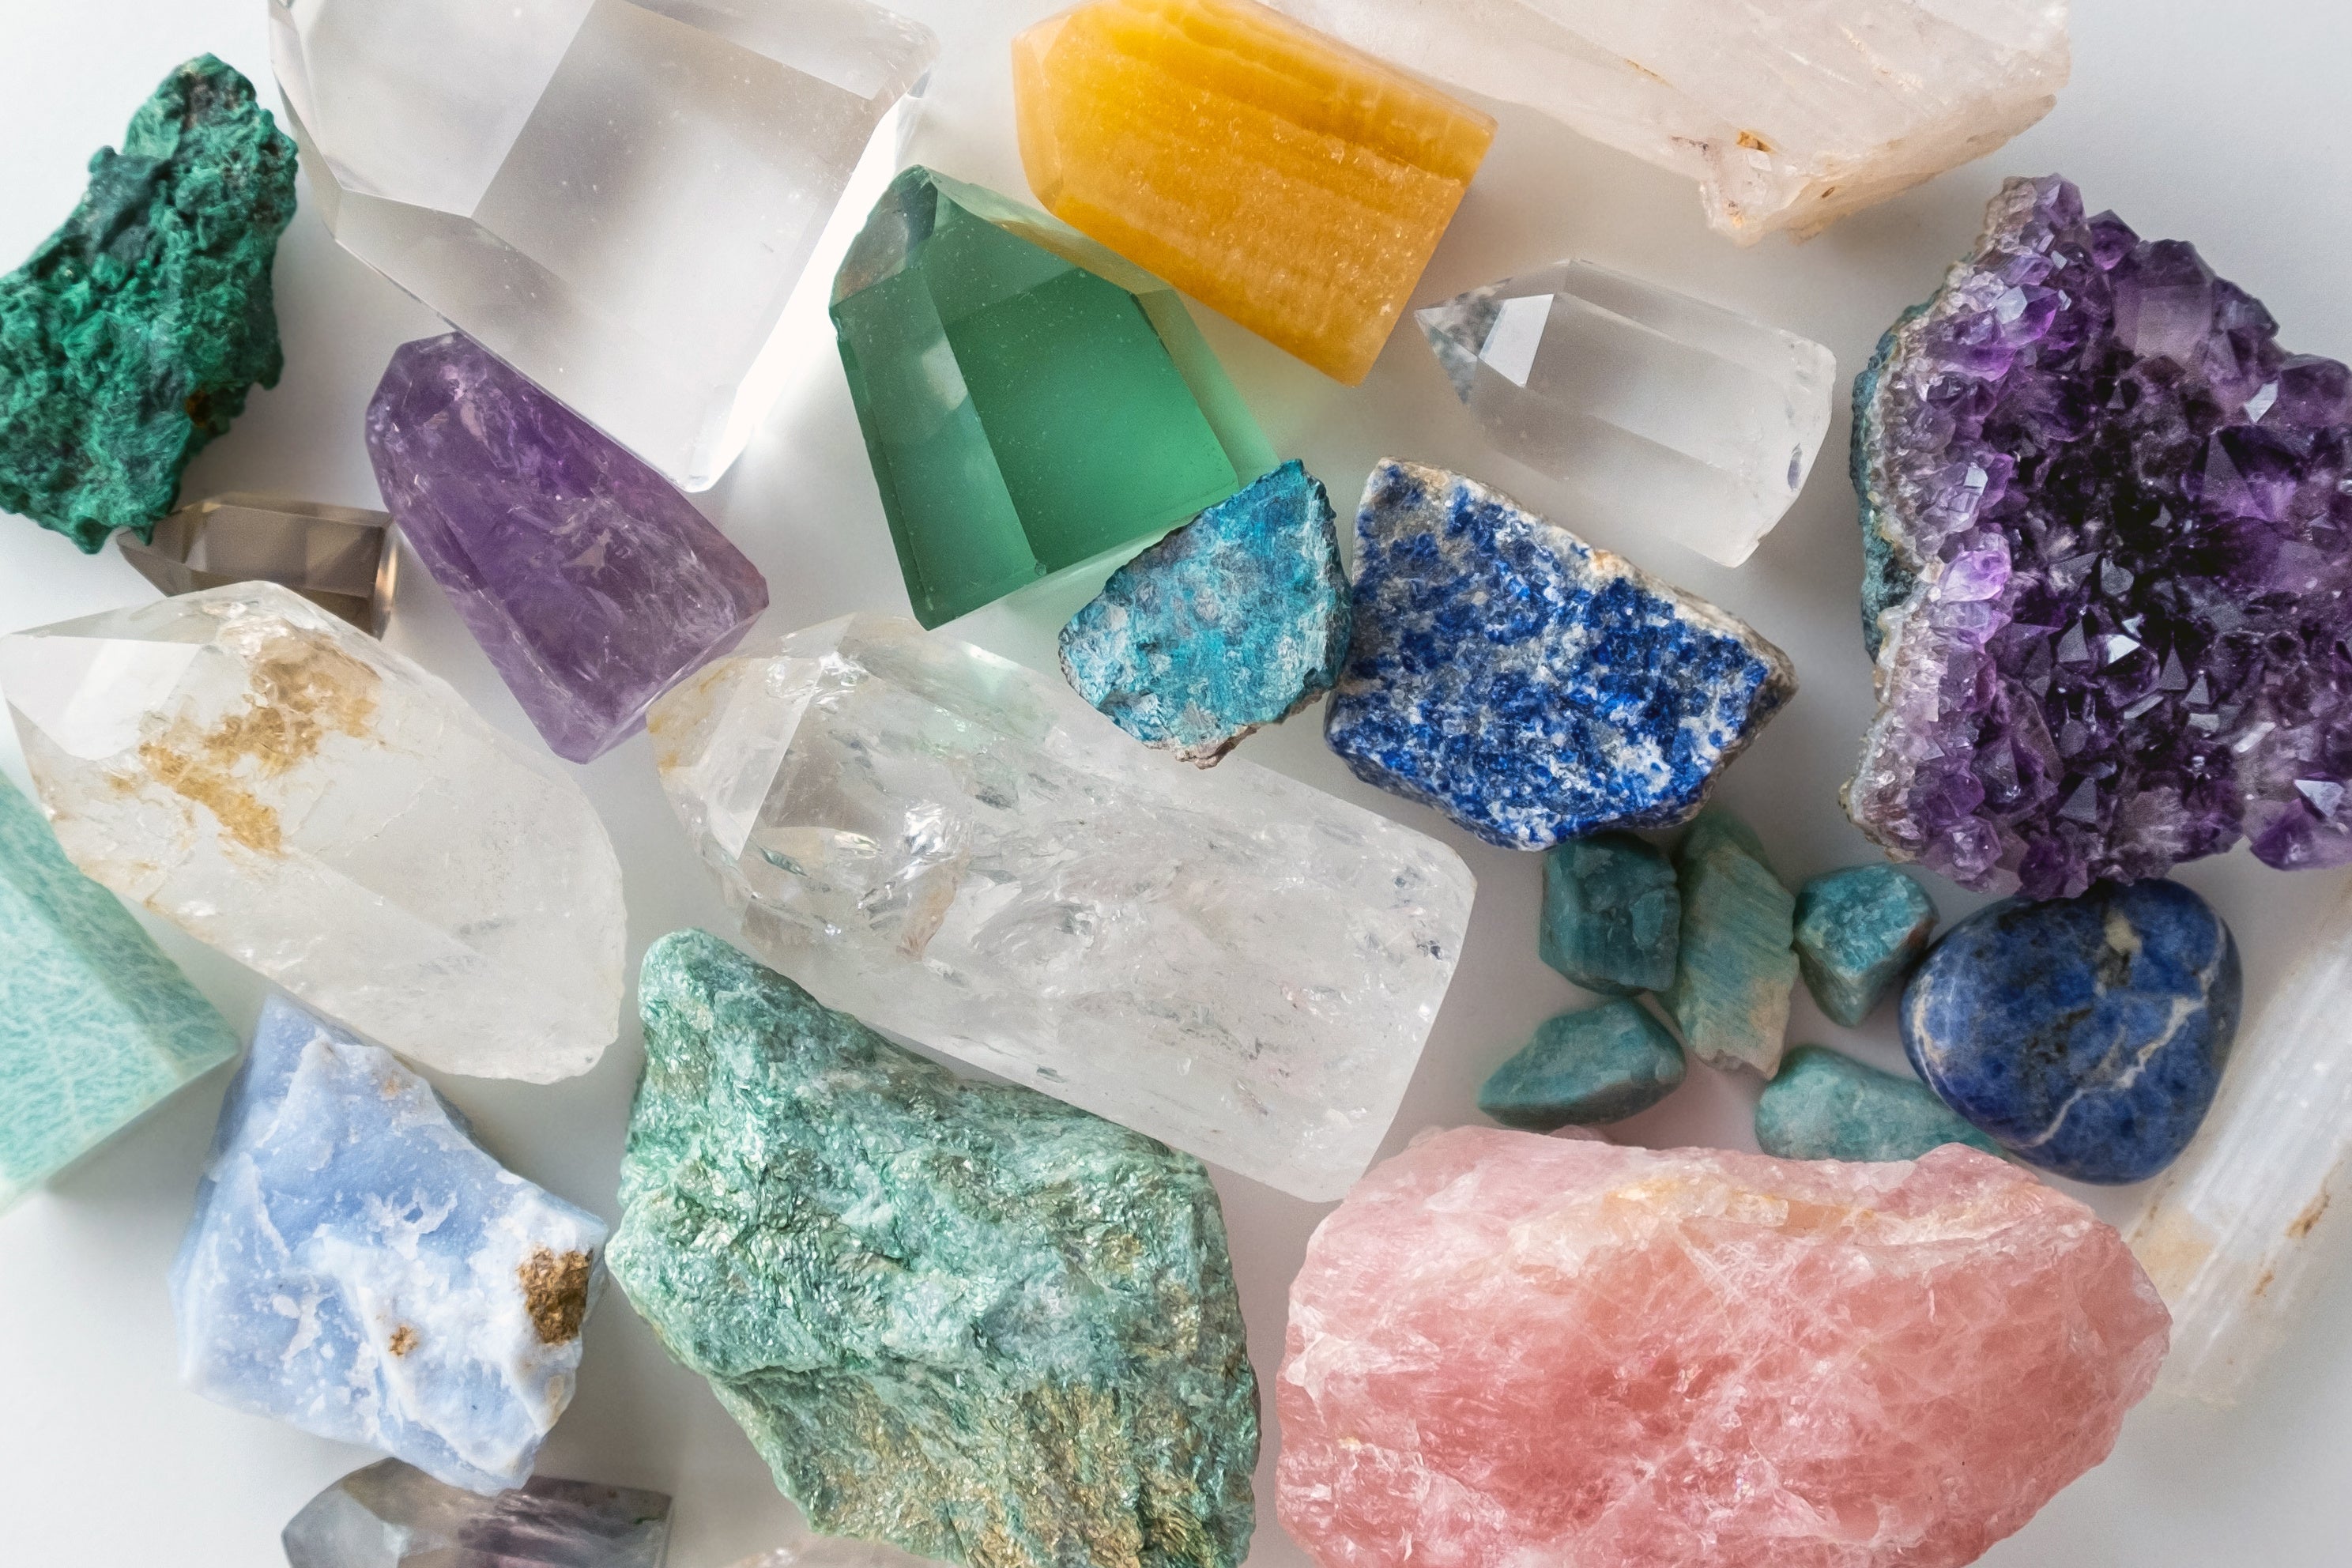 Top view of various crystals and gemstones on white background